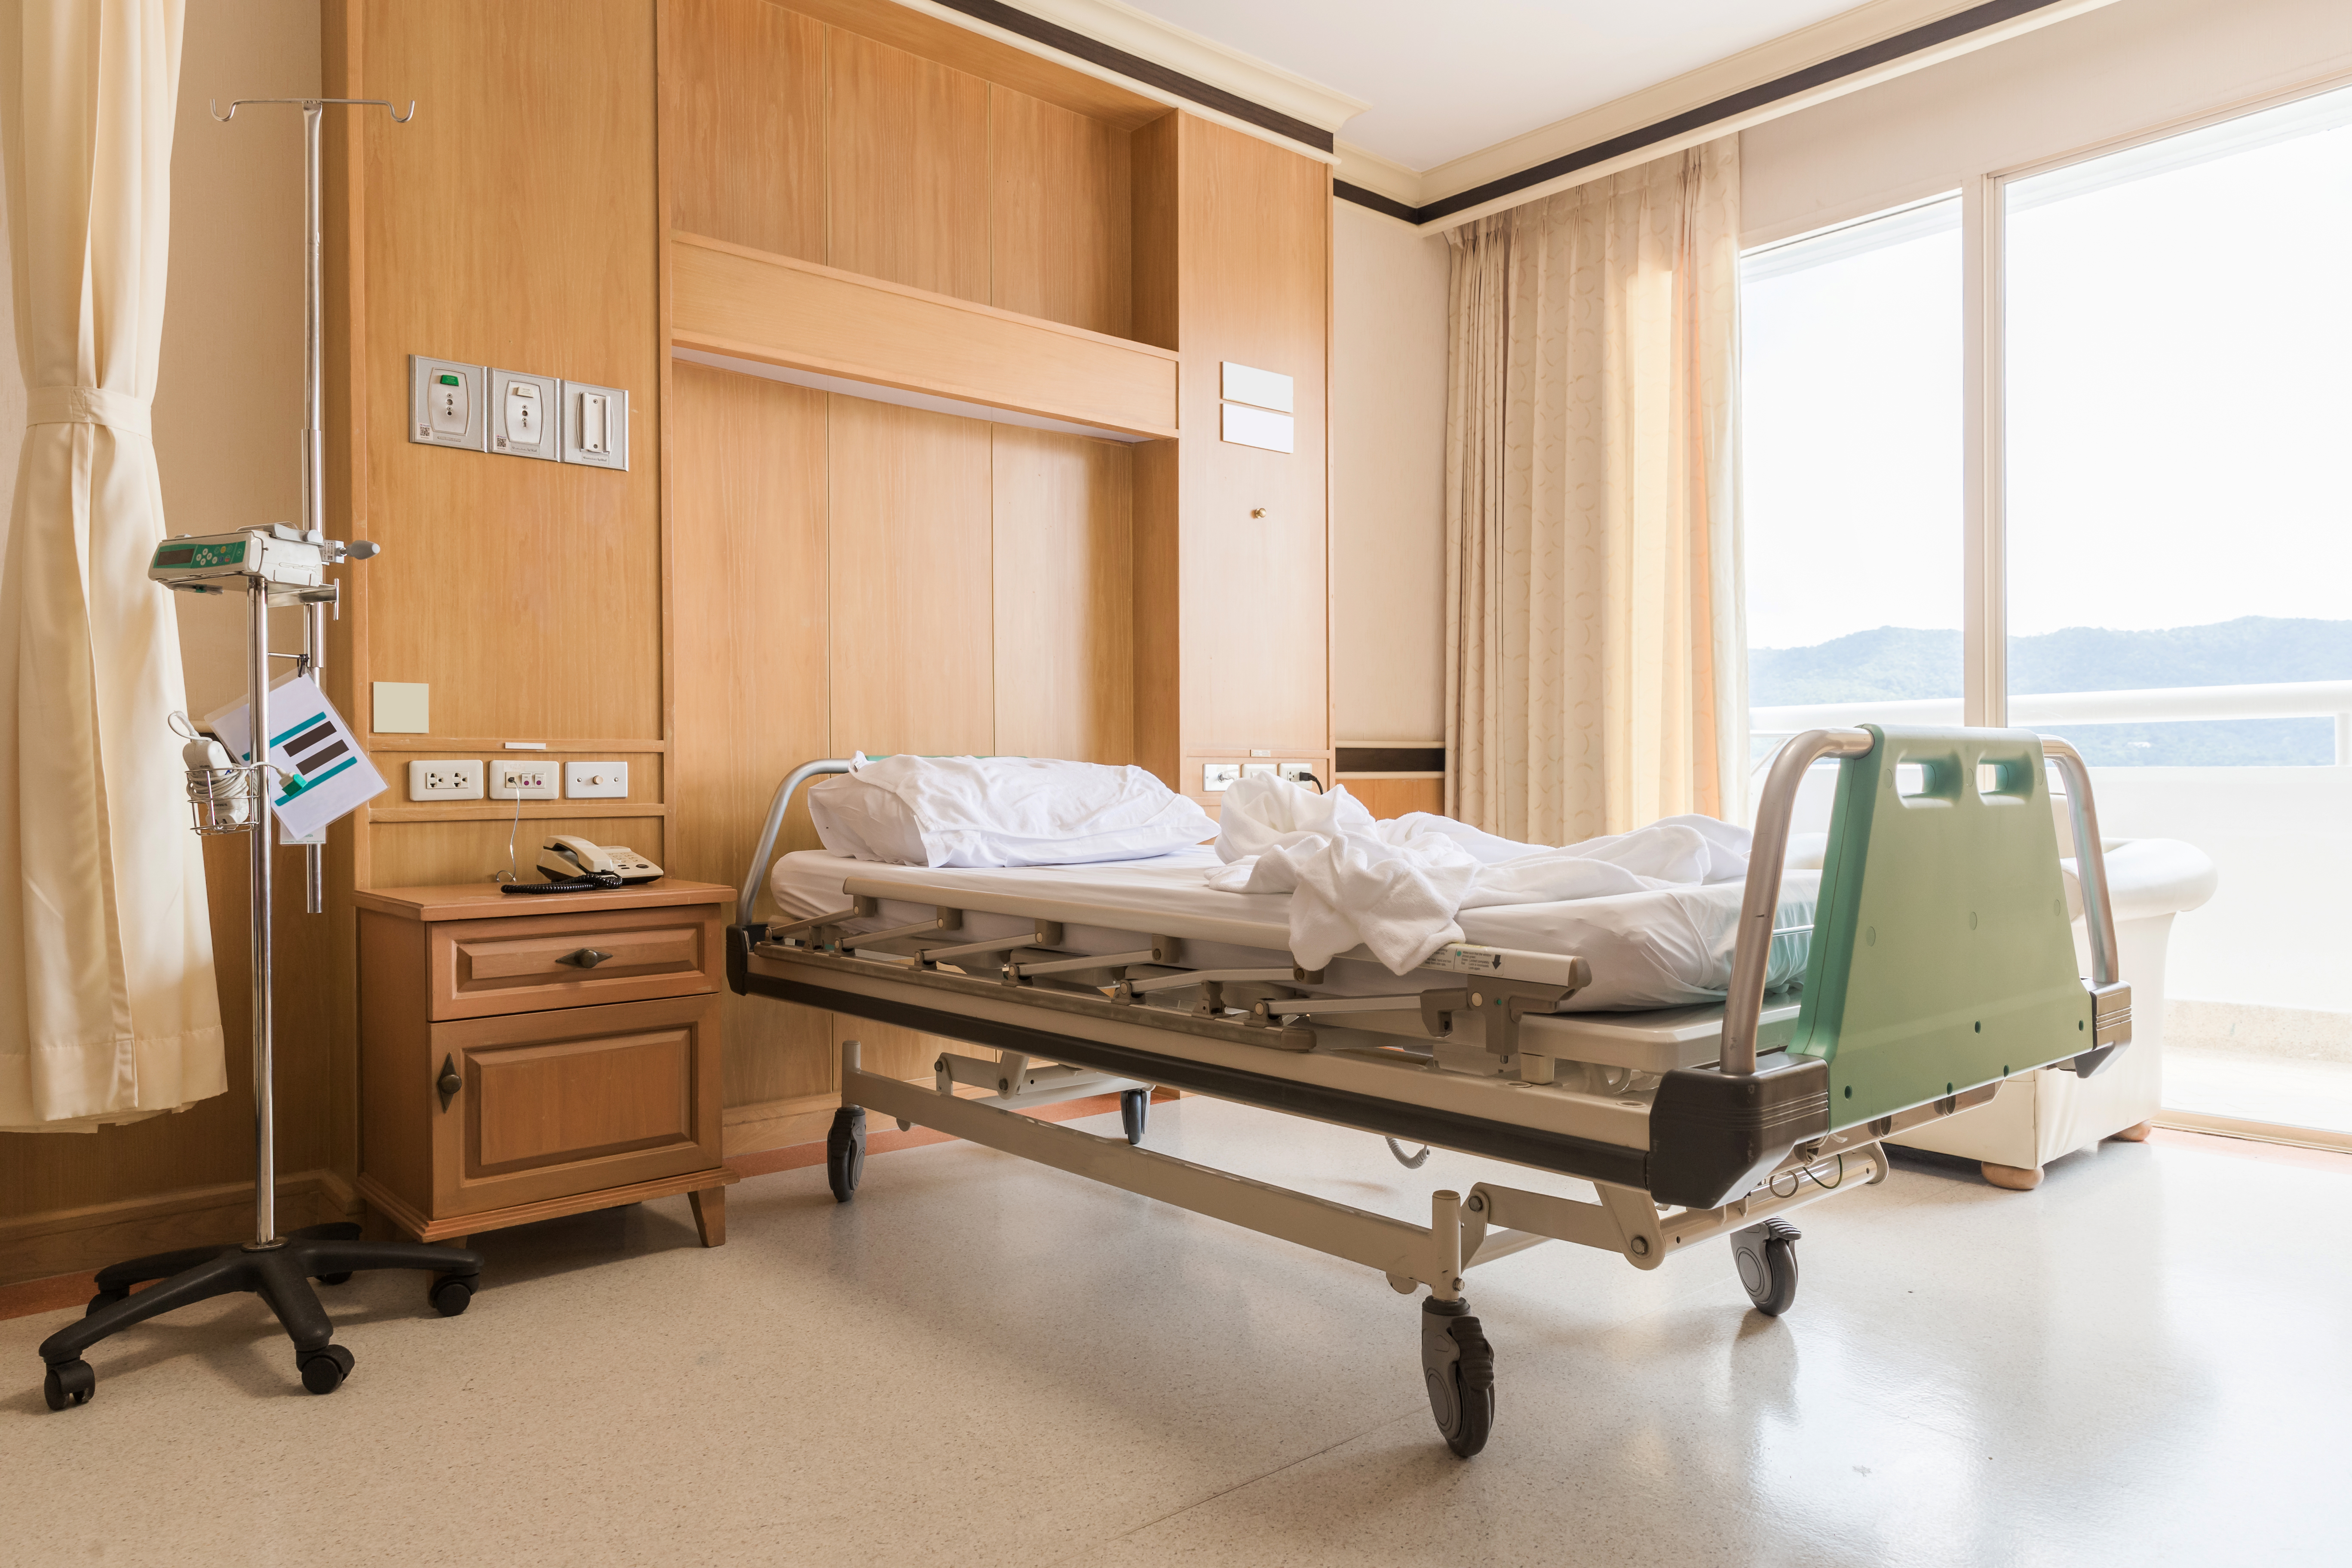 Interior of an empty hospital room | Source: Shutterstock